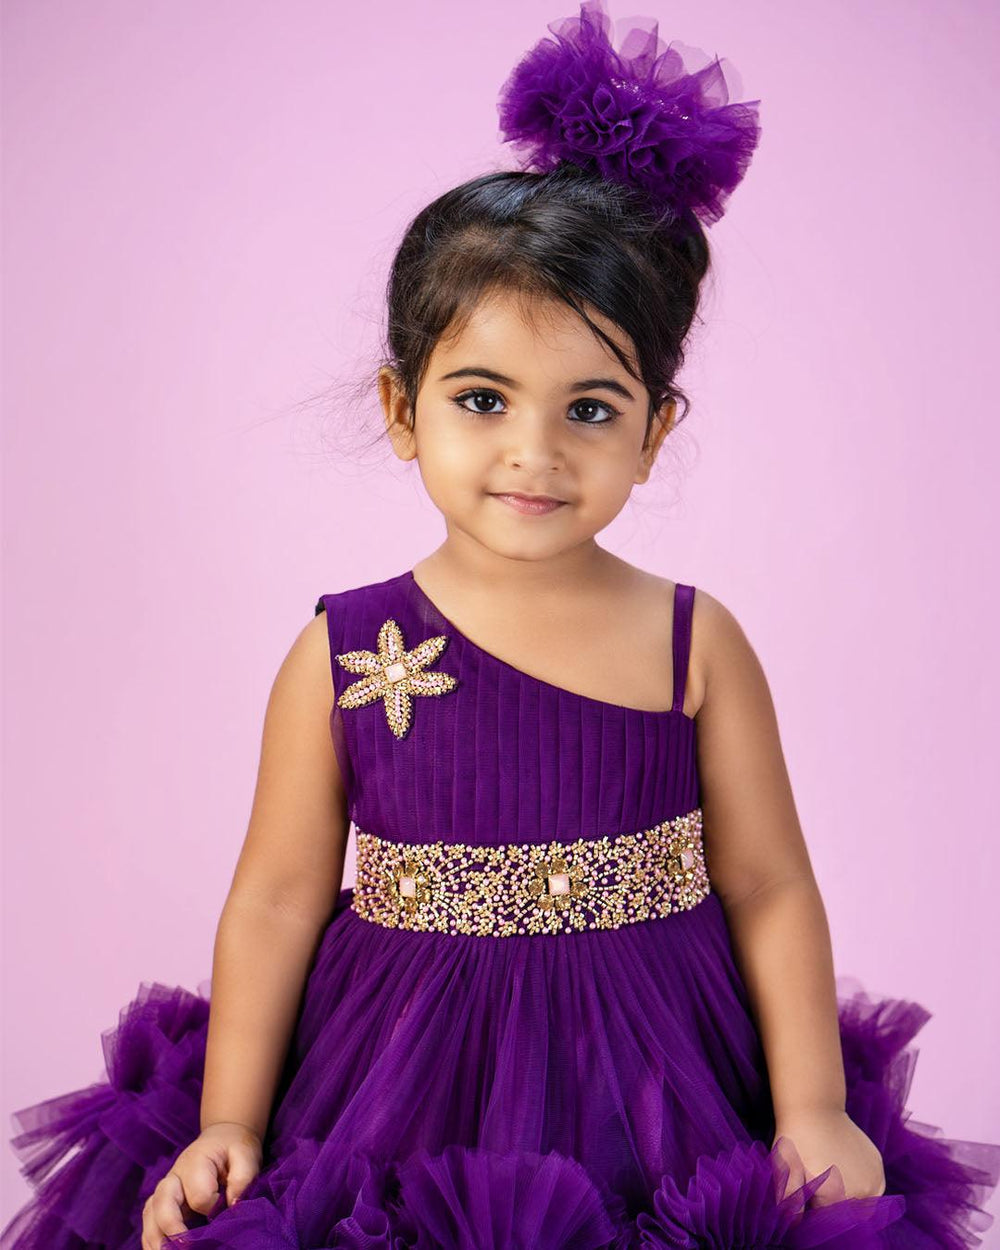 Purple Shade Pleated Ruffled Frock
Material: Purple Shade Pleated Ruffled Frock mono net with layered and ruffles on the end portion. Yoke portion is designed with pleated pattern and a handwork in t